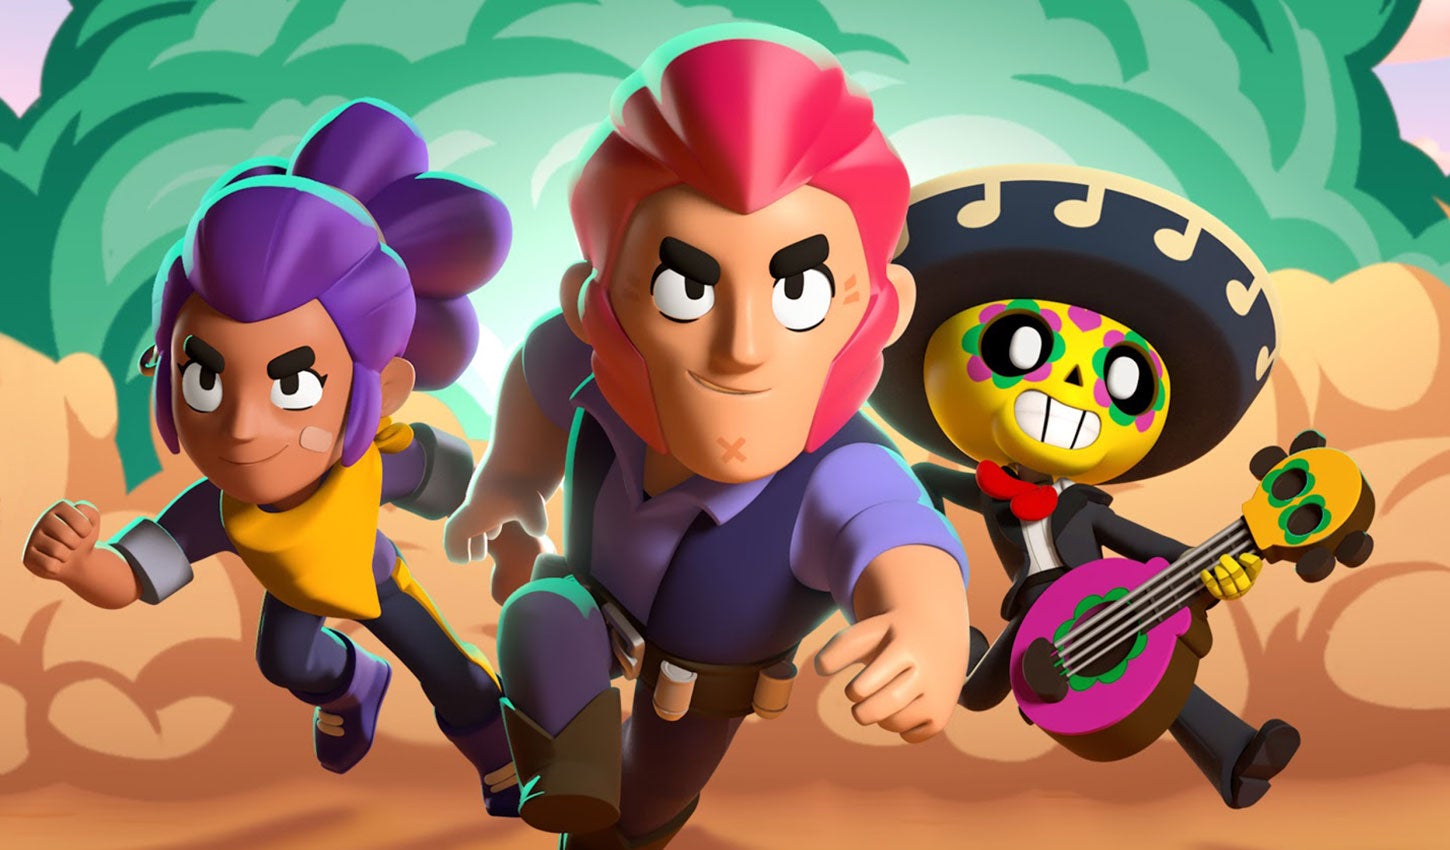 Image for Brawl Stars is Supercell's fourth title to pass $1bn in lifetime revenue